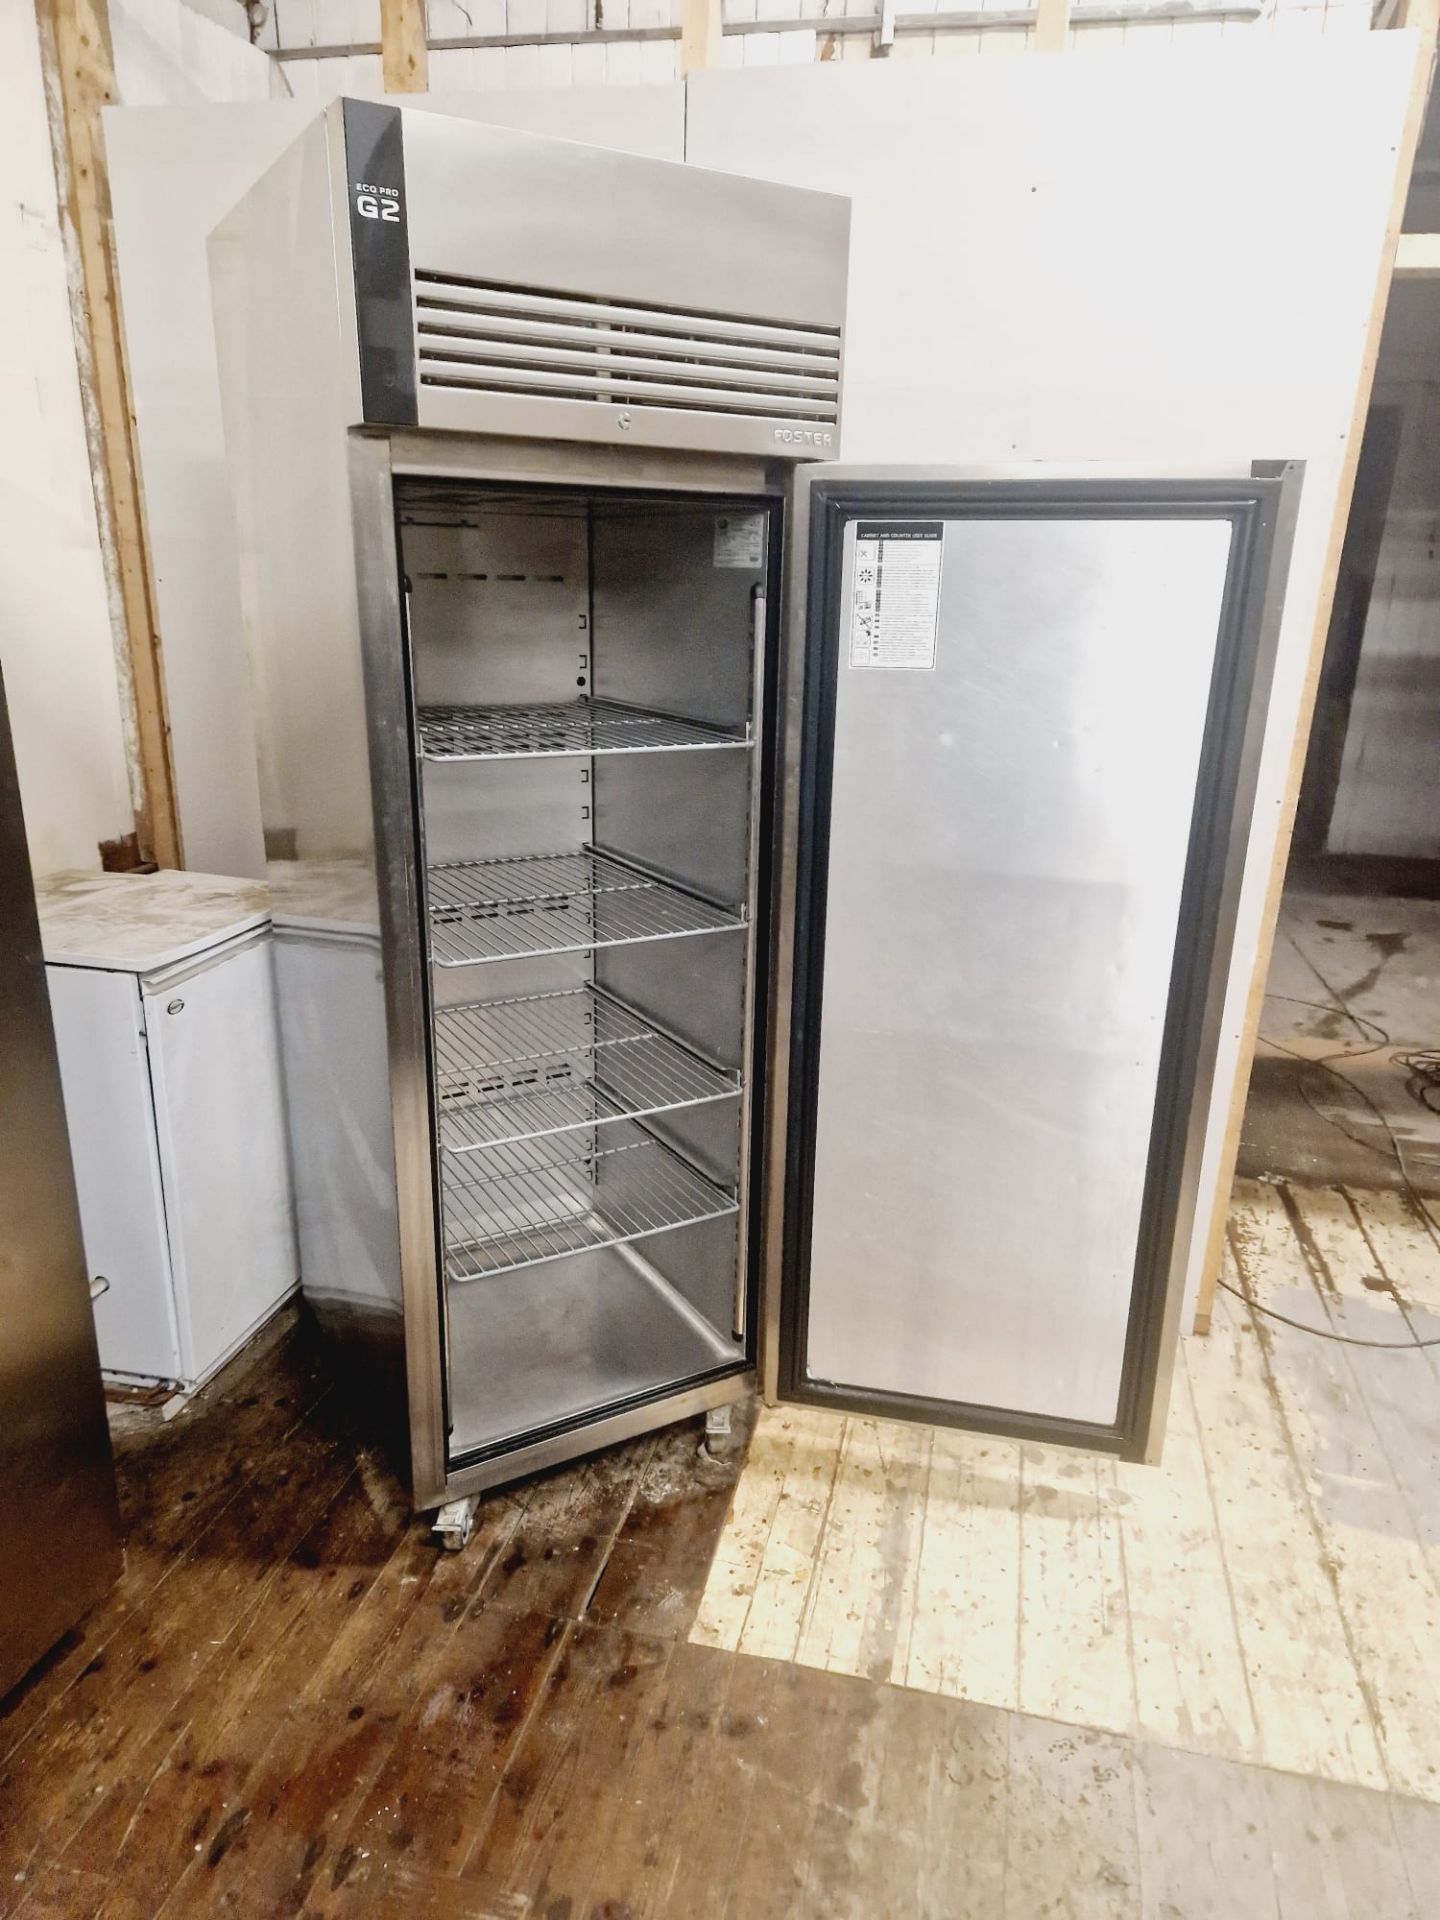 FOSTER G2 UPRIGHT FRIDGE FULLY SERVICED AND WORKING - Image 3 of 3